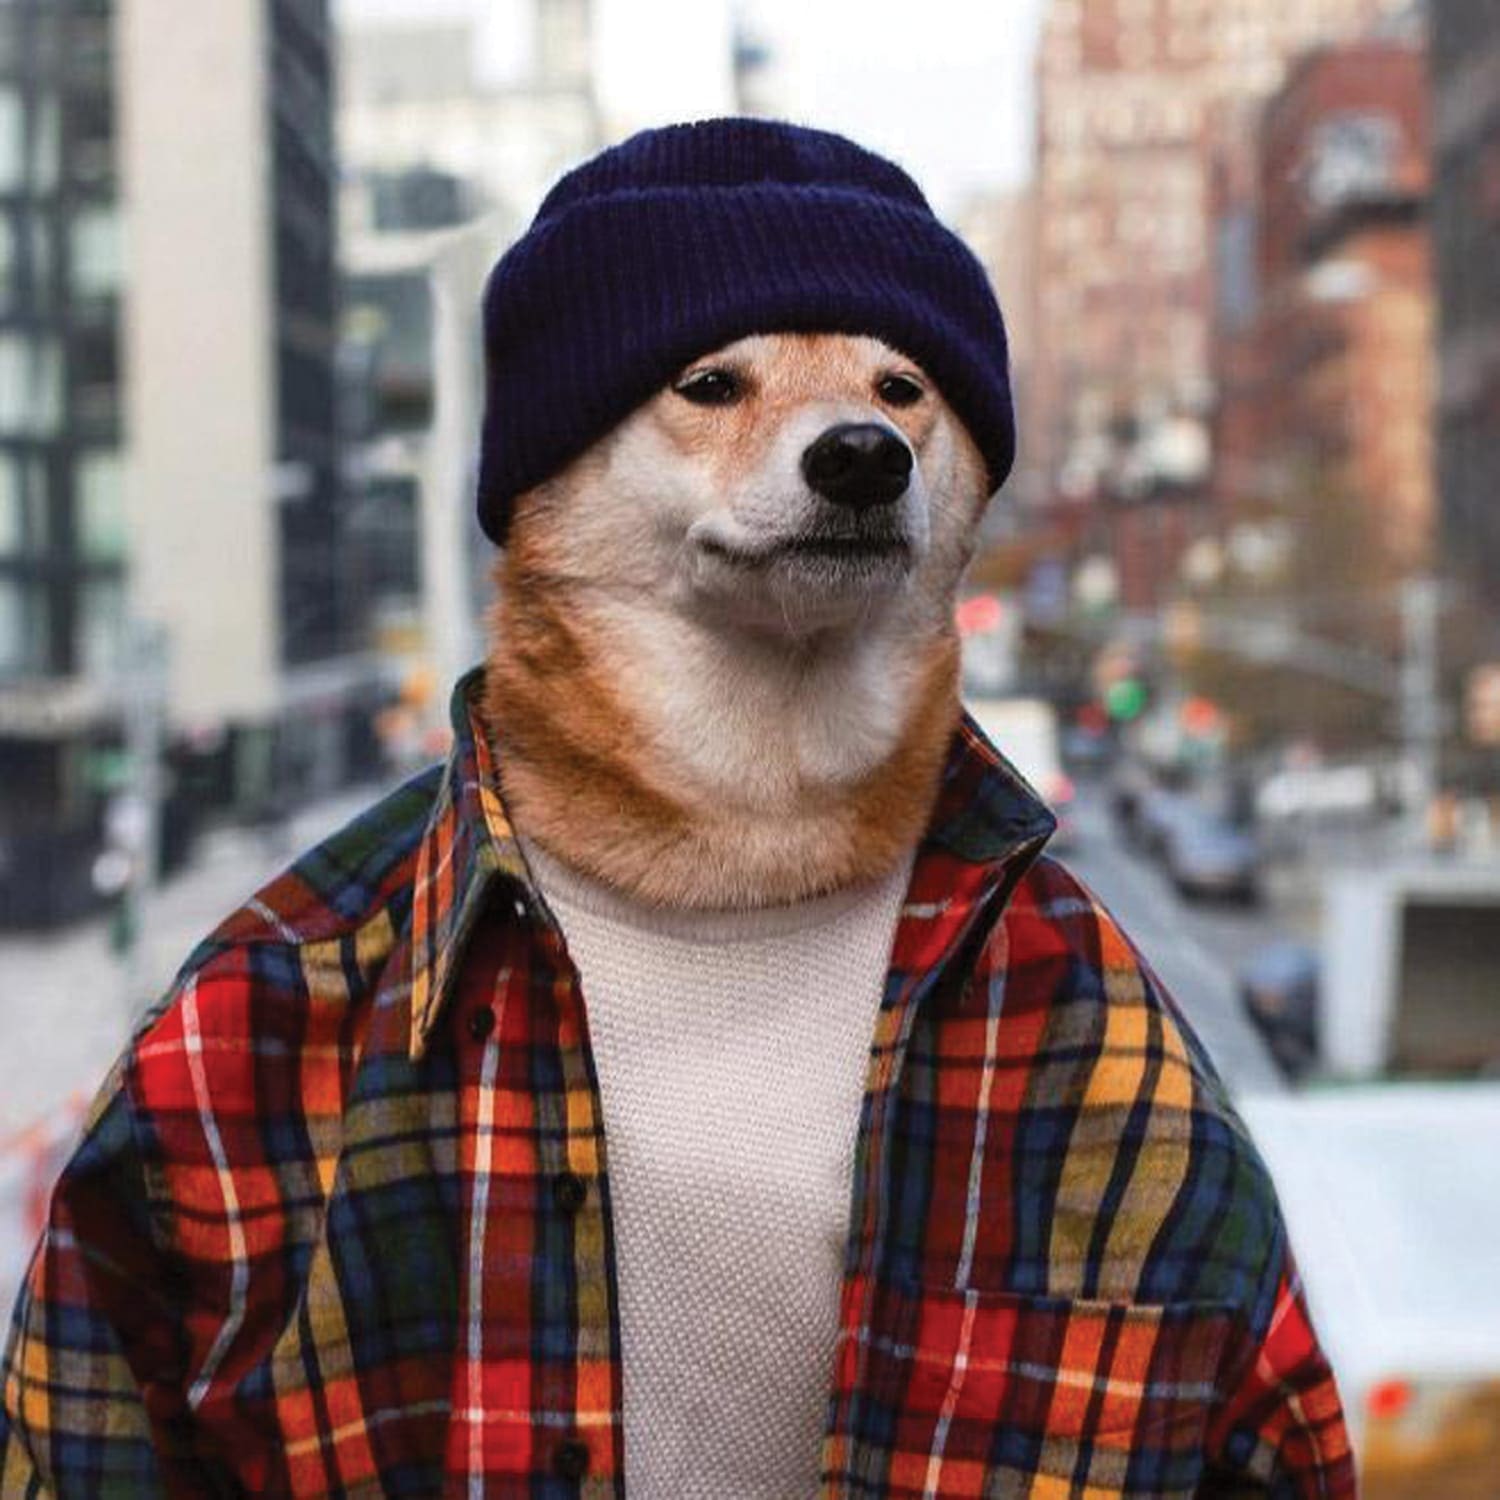 PUP IDOL: Japanese style guru who earns £140k a year and has his own clothing line - is a dog